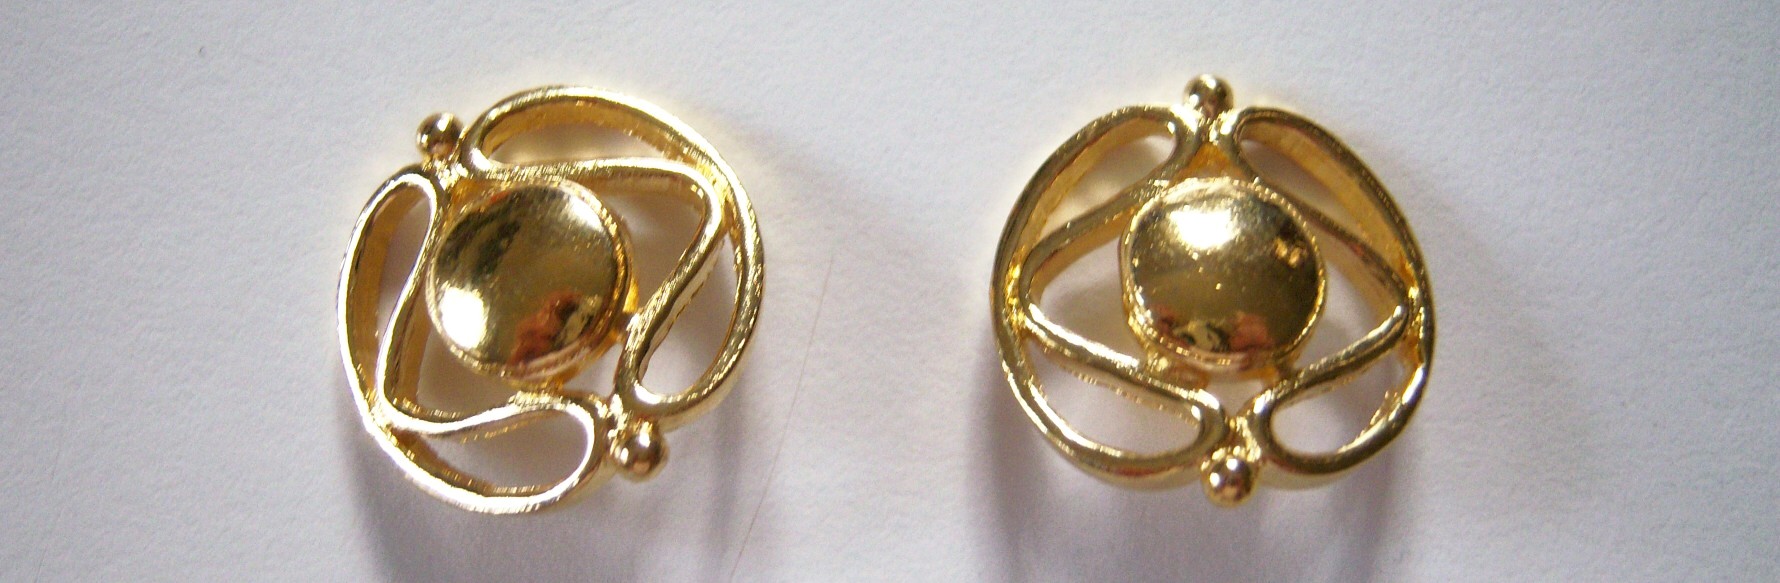 Last Two Gold 3/4" Metal Buttons